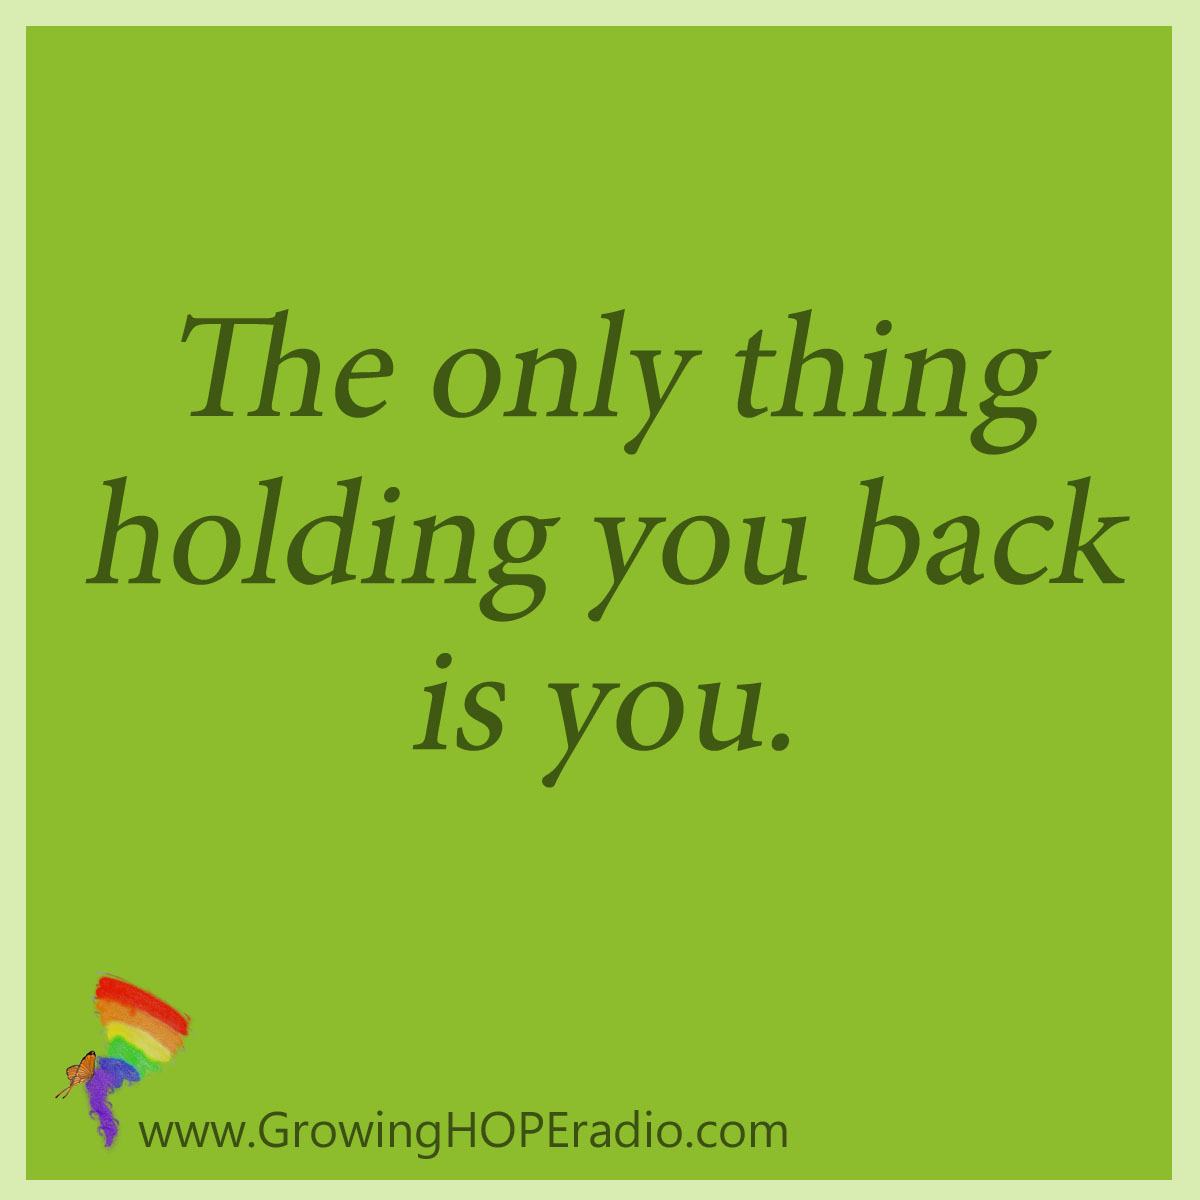 #GrowingHOPE Daily quote - holding you back